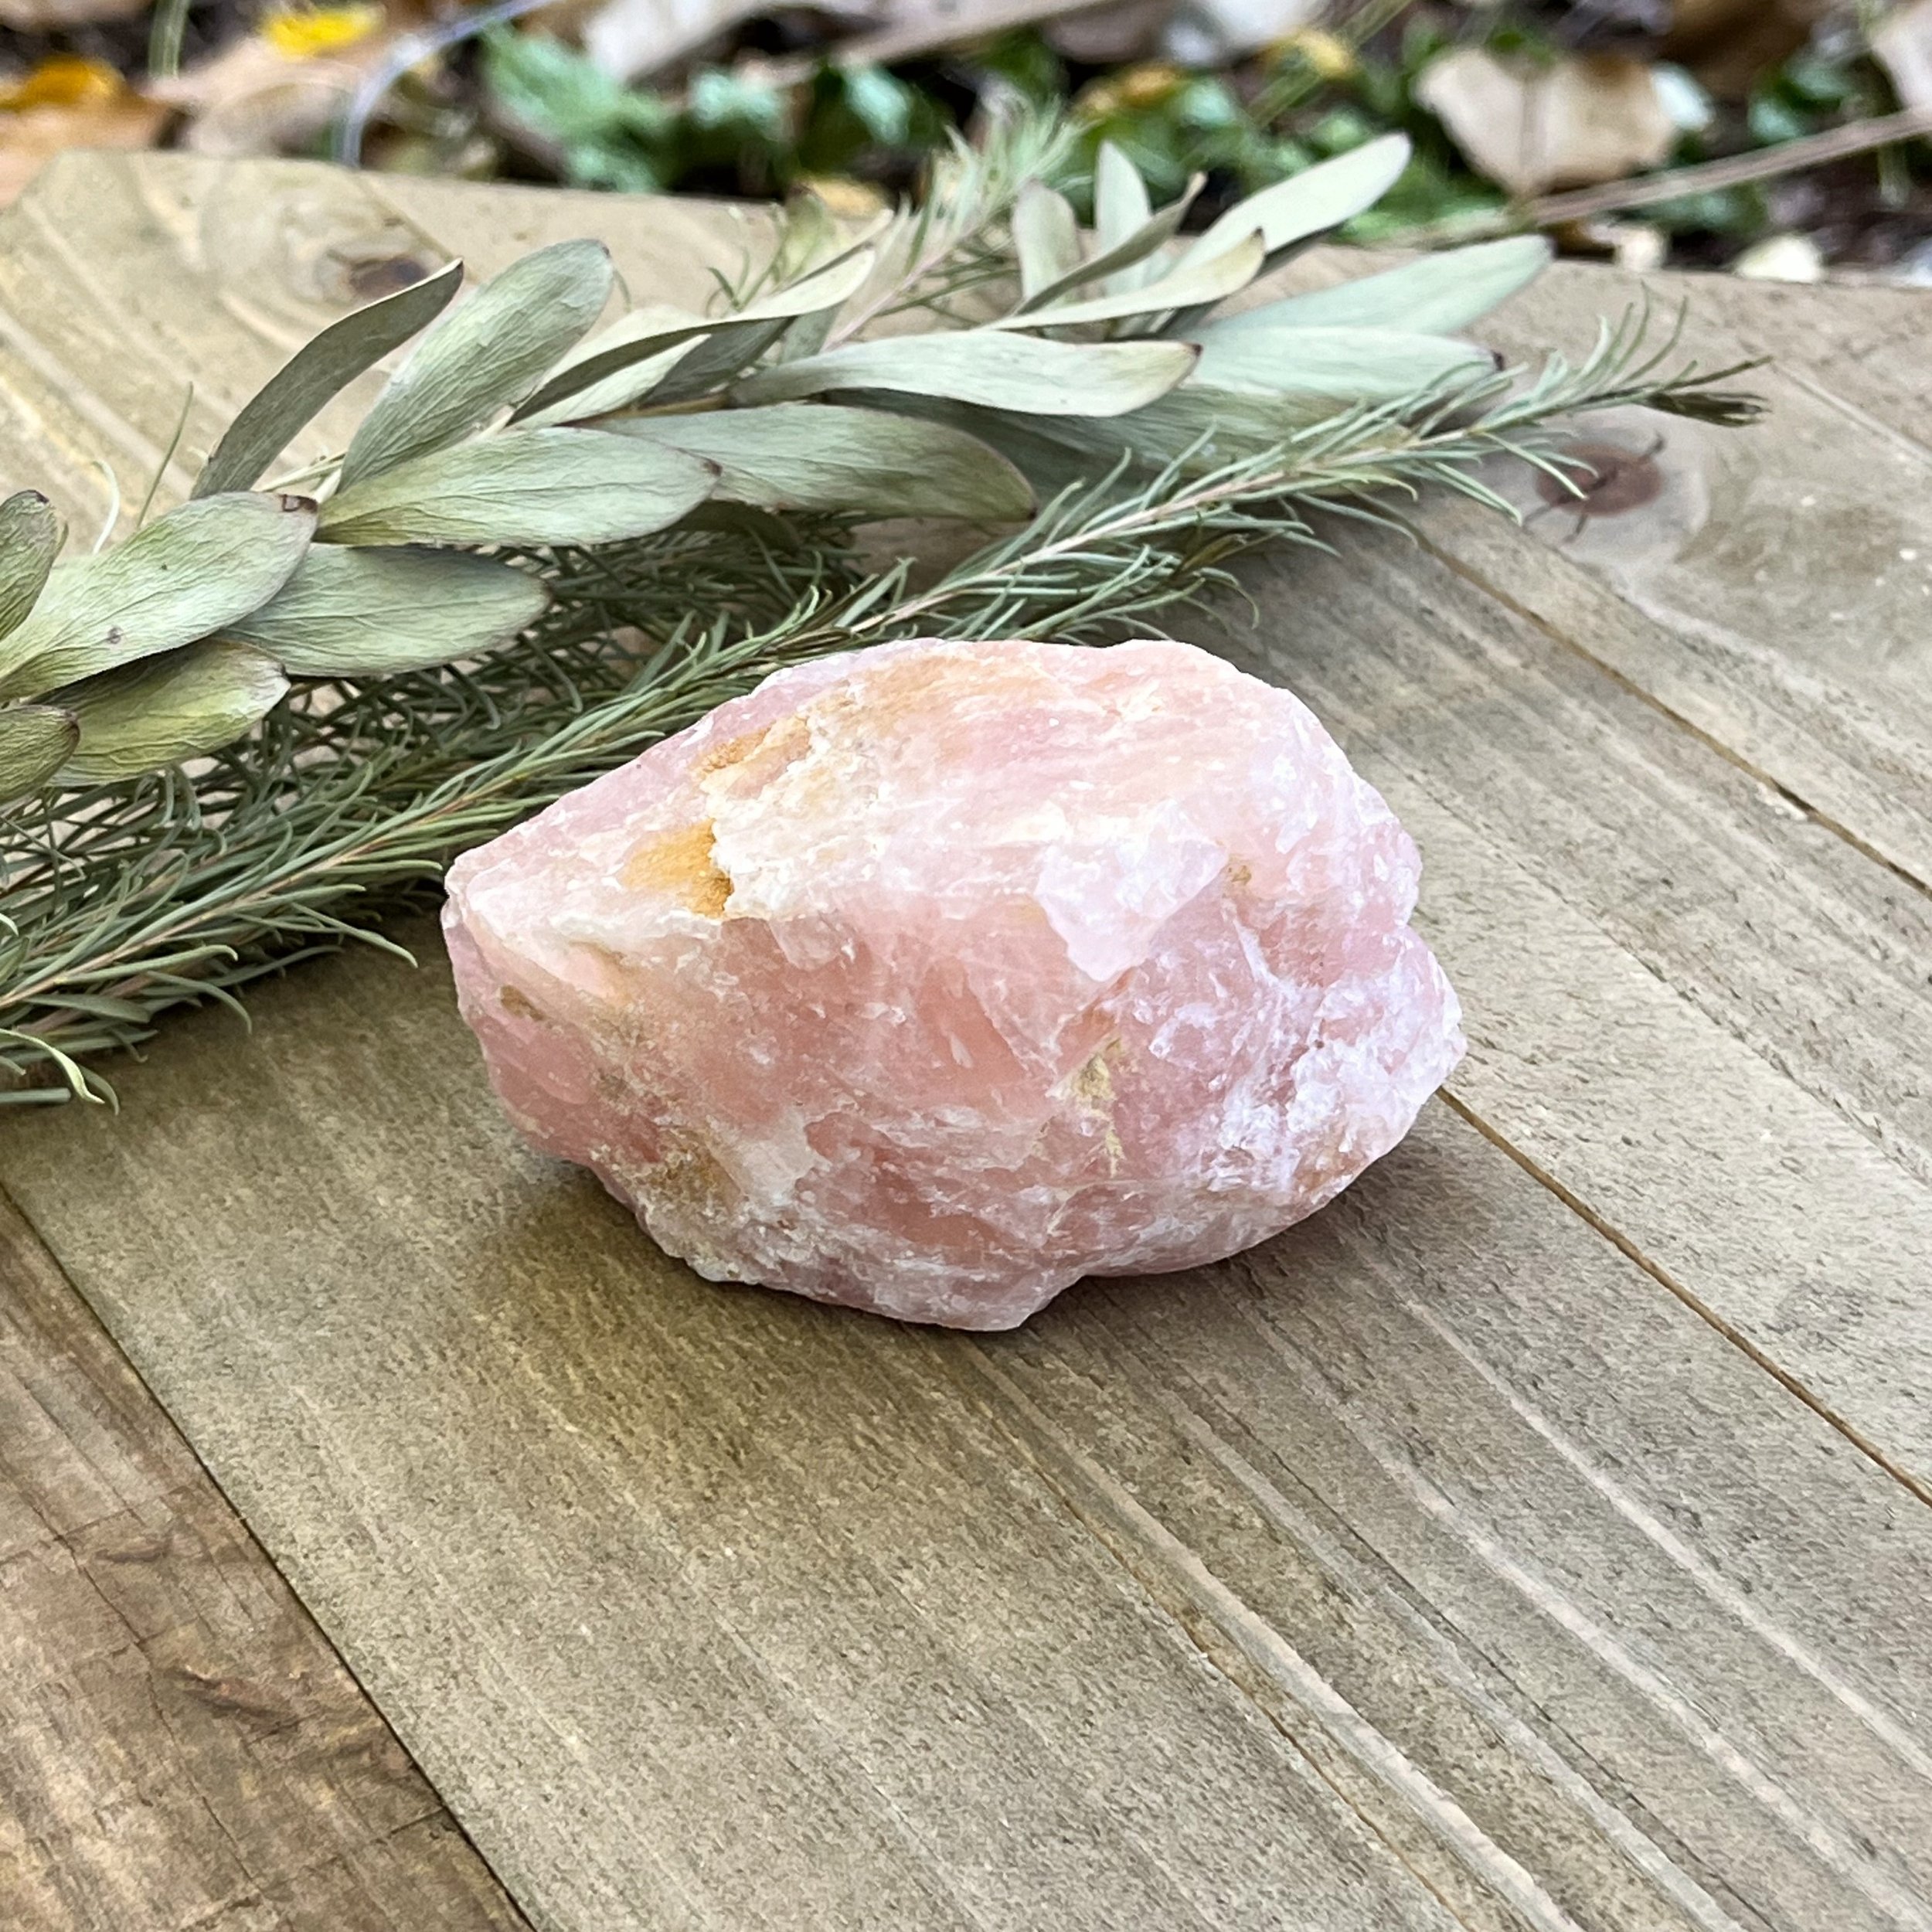 Rose Quartz Bracelet Certified for Unconditional Love and Healing– Imeora